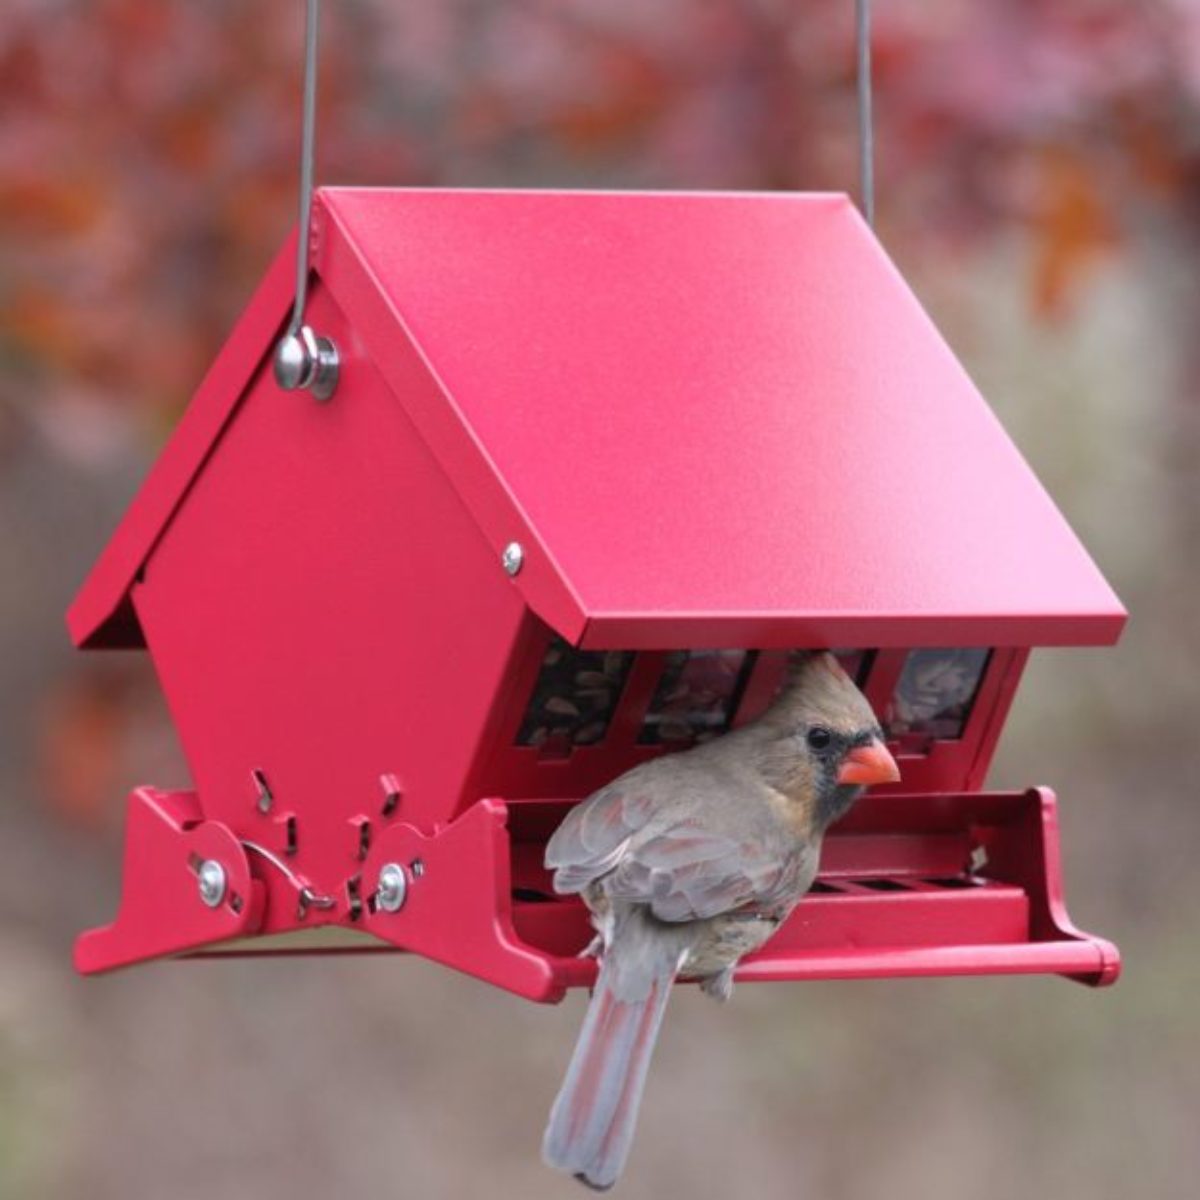 How to build a squirrel proof bird feeder